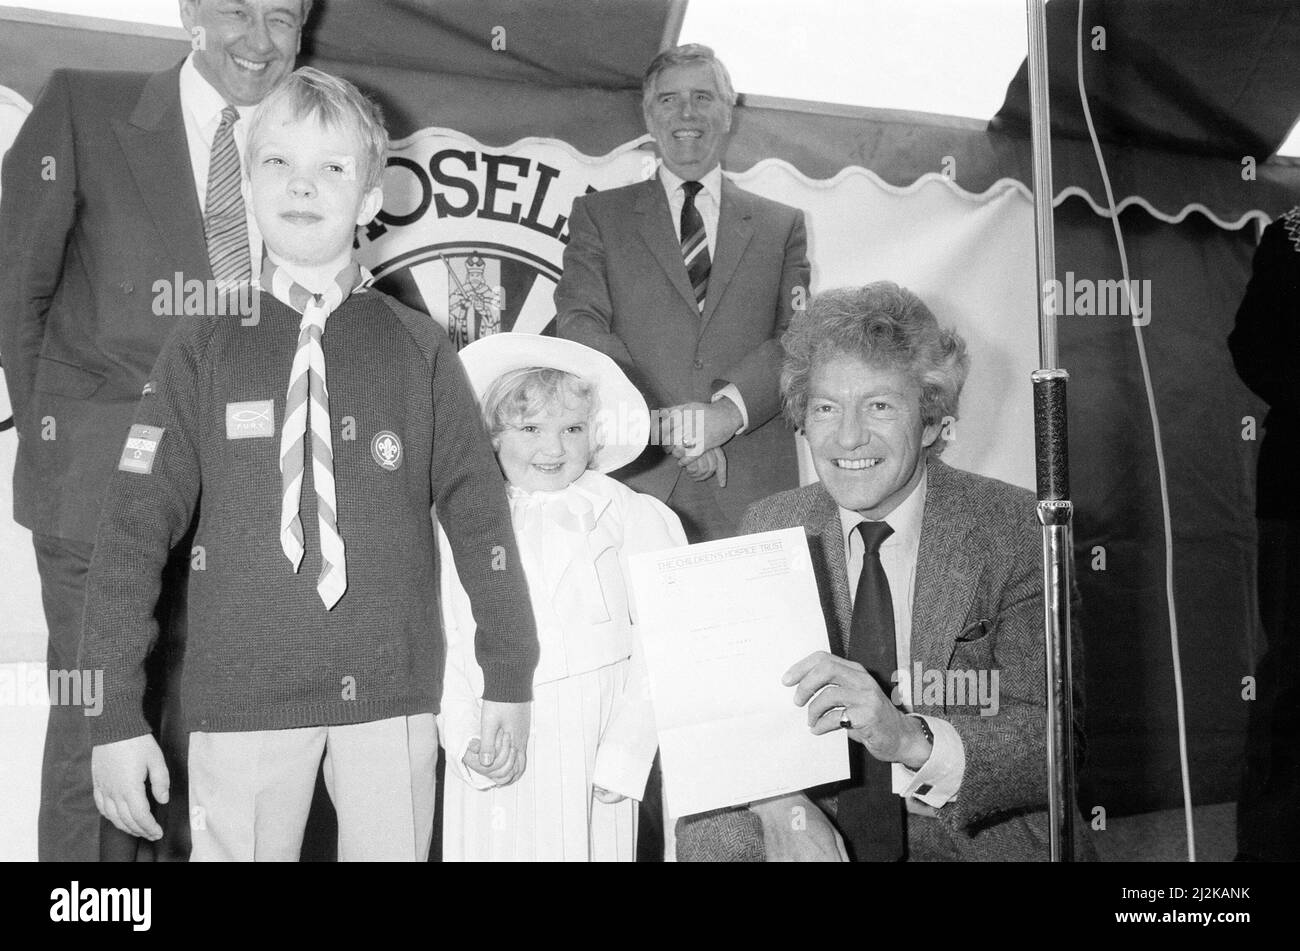 Acorns Children's Hospice. Topping Out Ceremony, with guest of honour Lord Lichfield, Patrick Anson, 5th Earl of Lichfield, 8th March 1988. Pictured with Simon Burnett aged 8 and his sister Victoria aged 5, who chose the name Acorns for the hospice. Stock Photo